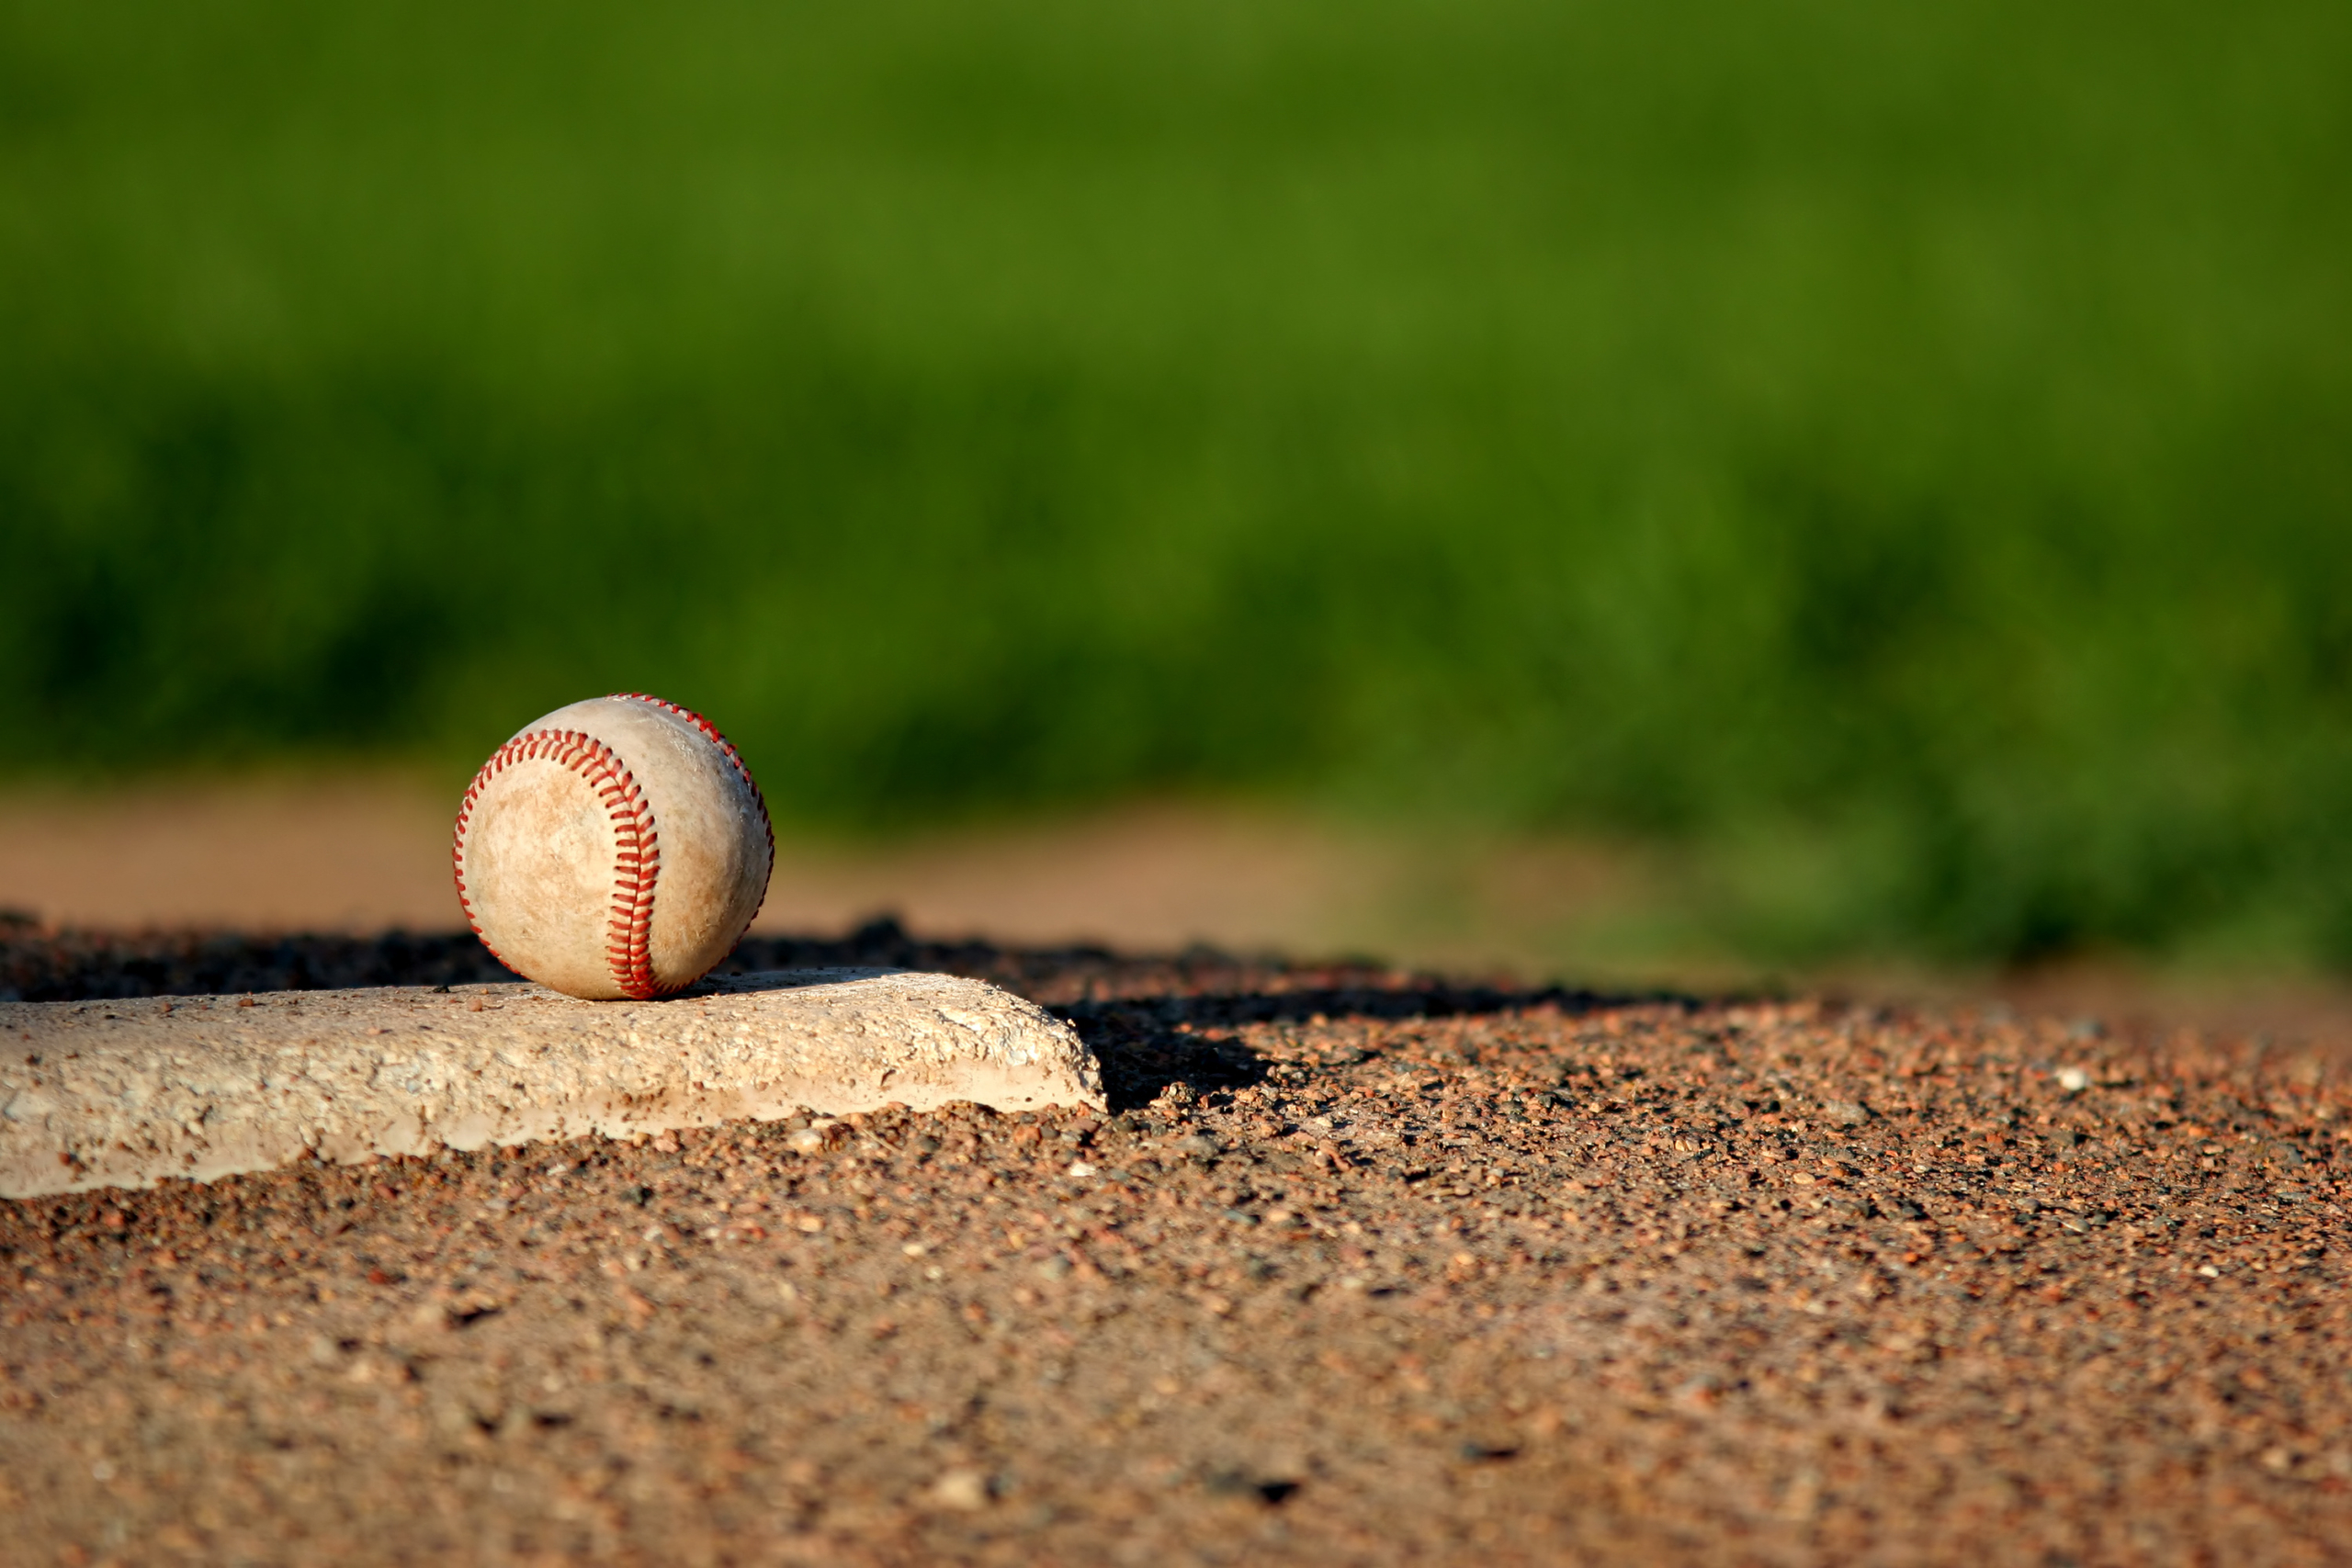 Close-up of a baseball on the pitcher's mound.